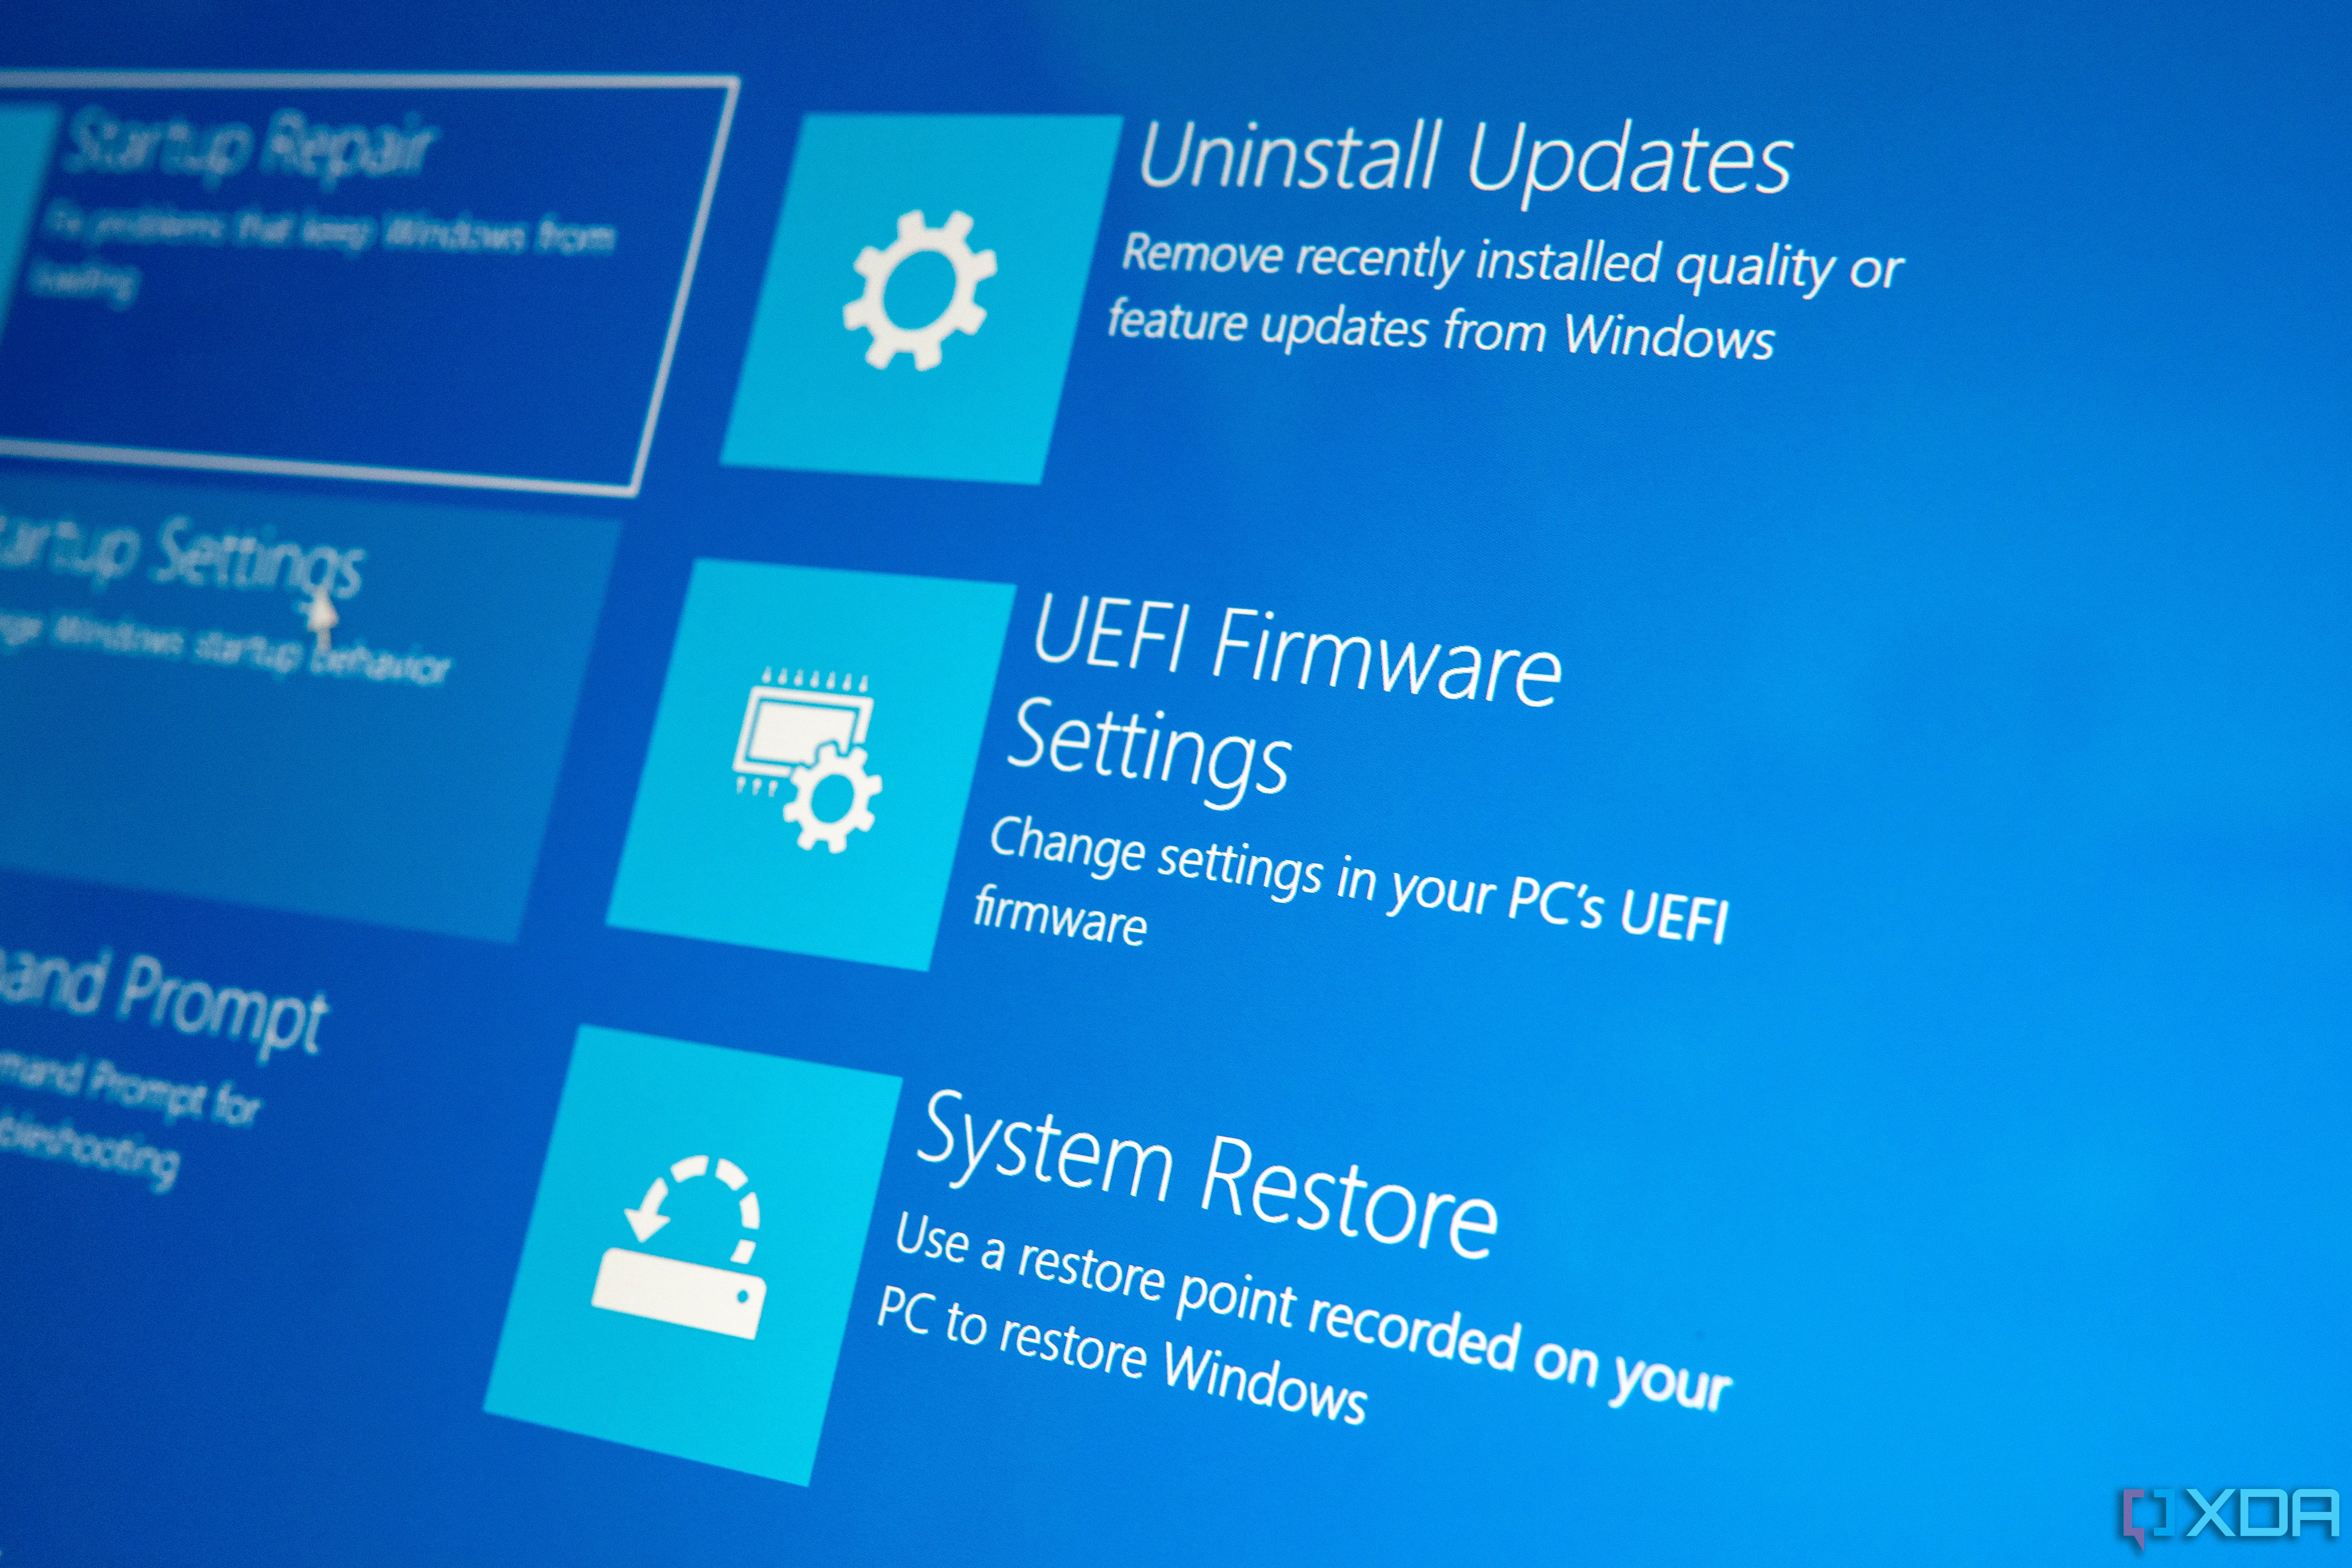 Close-up of Windows Recovery Environment focused on the option called UEFI Firmware Settings